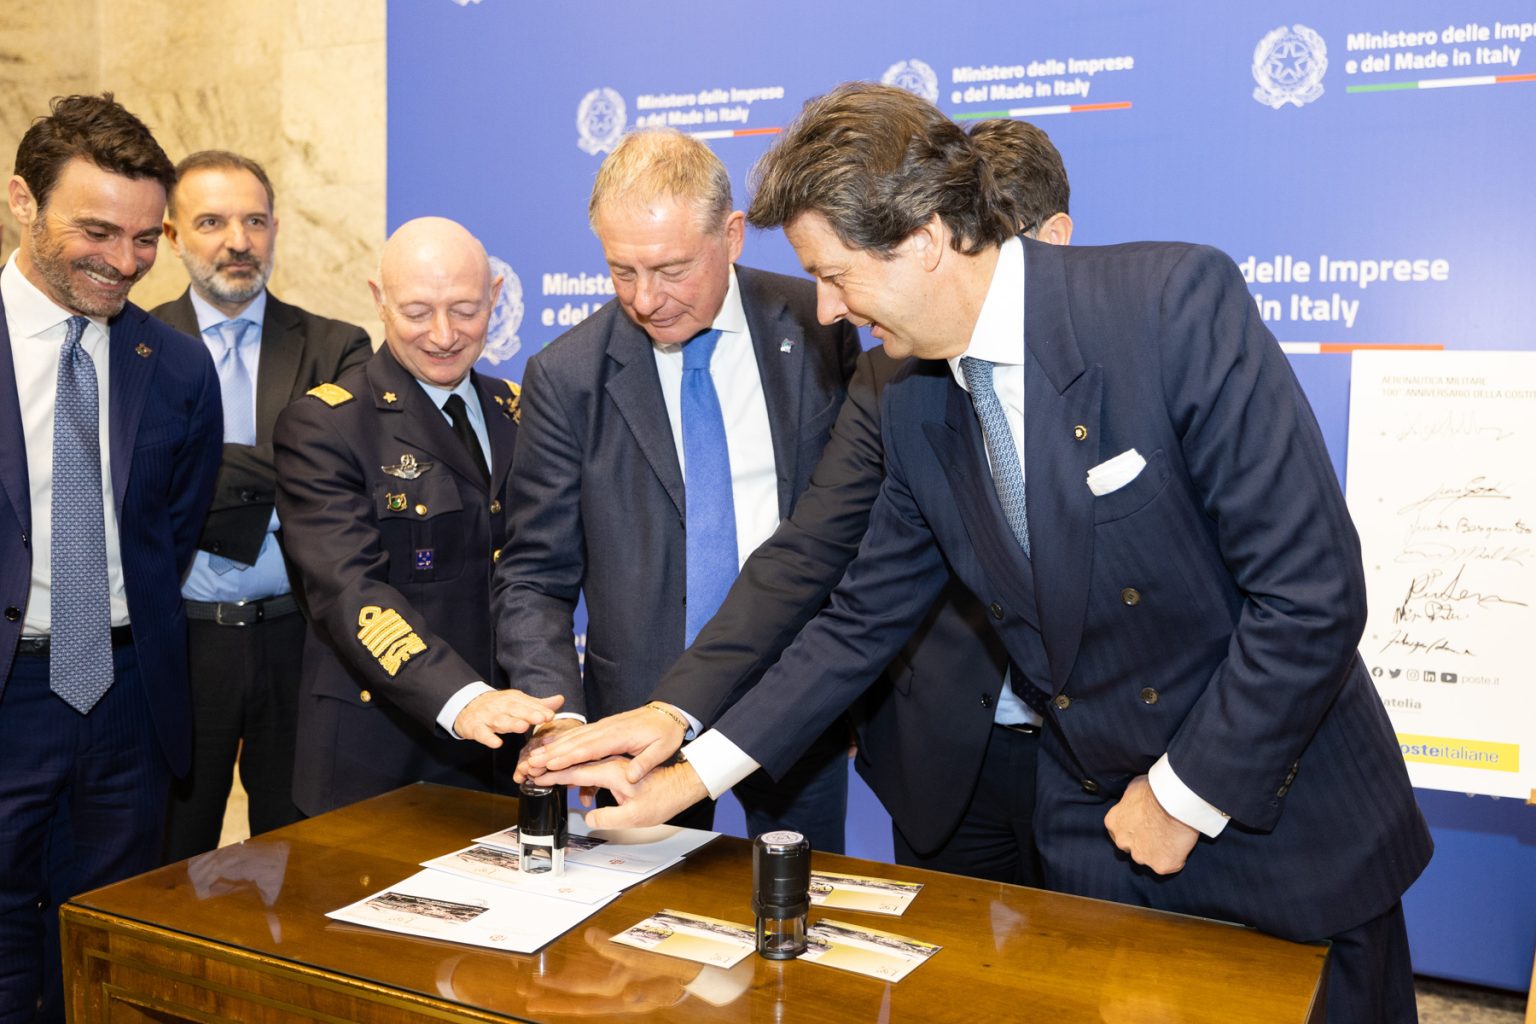 Joint philatelic issue ceremony with the Italian Air Force